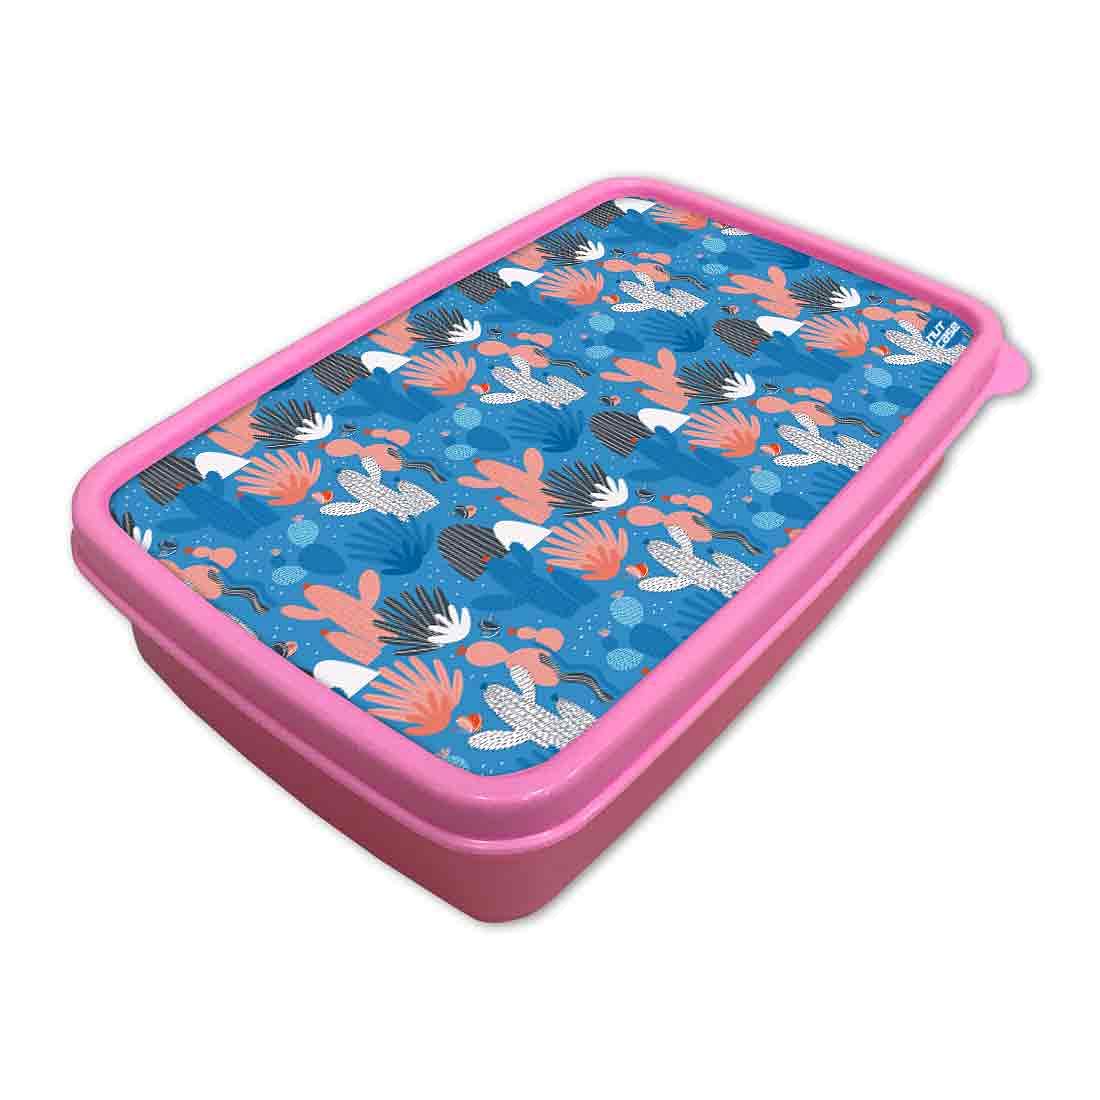 Lunch Box With Compartments for Girls Snack Containers - Cactus Plant Nutcase